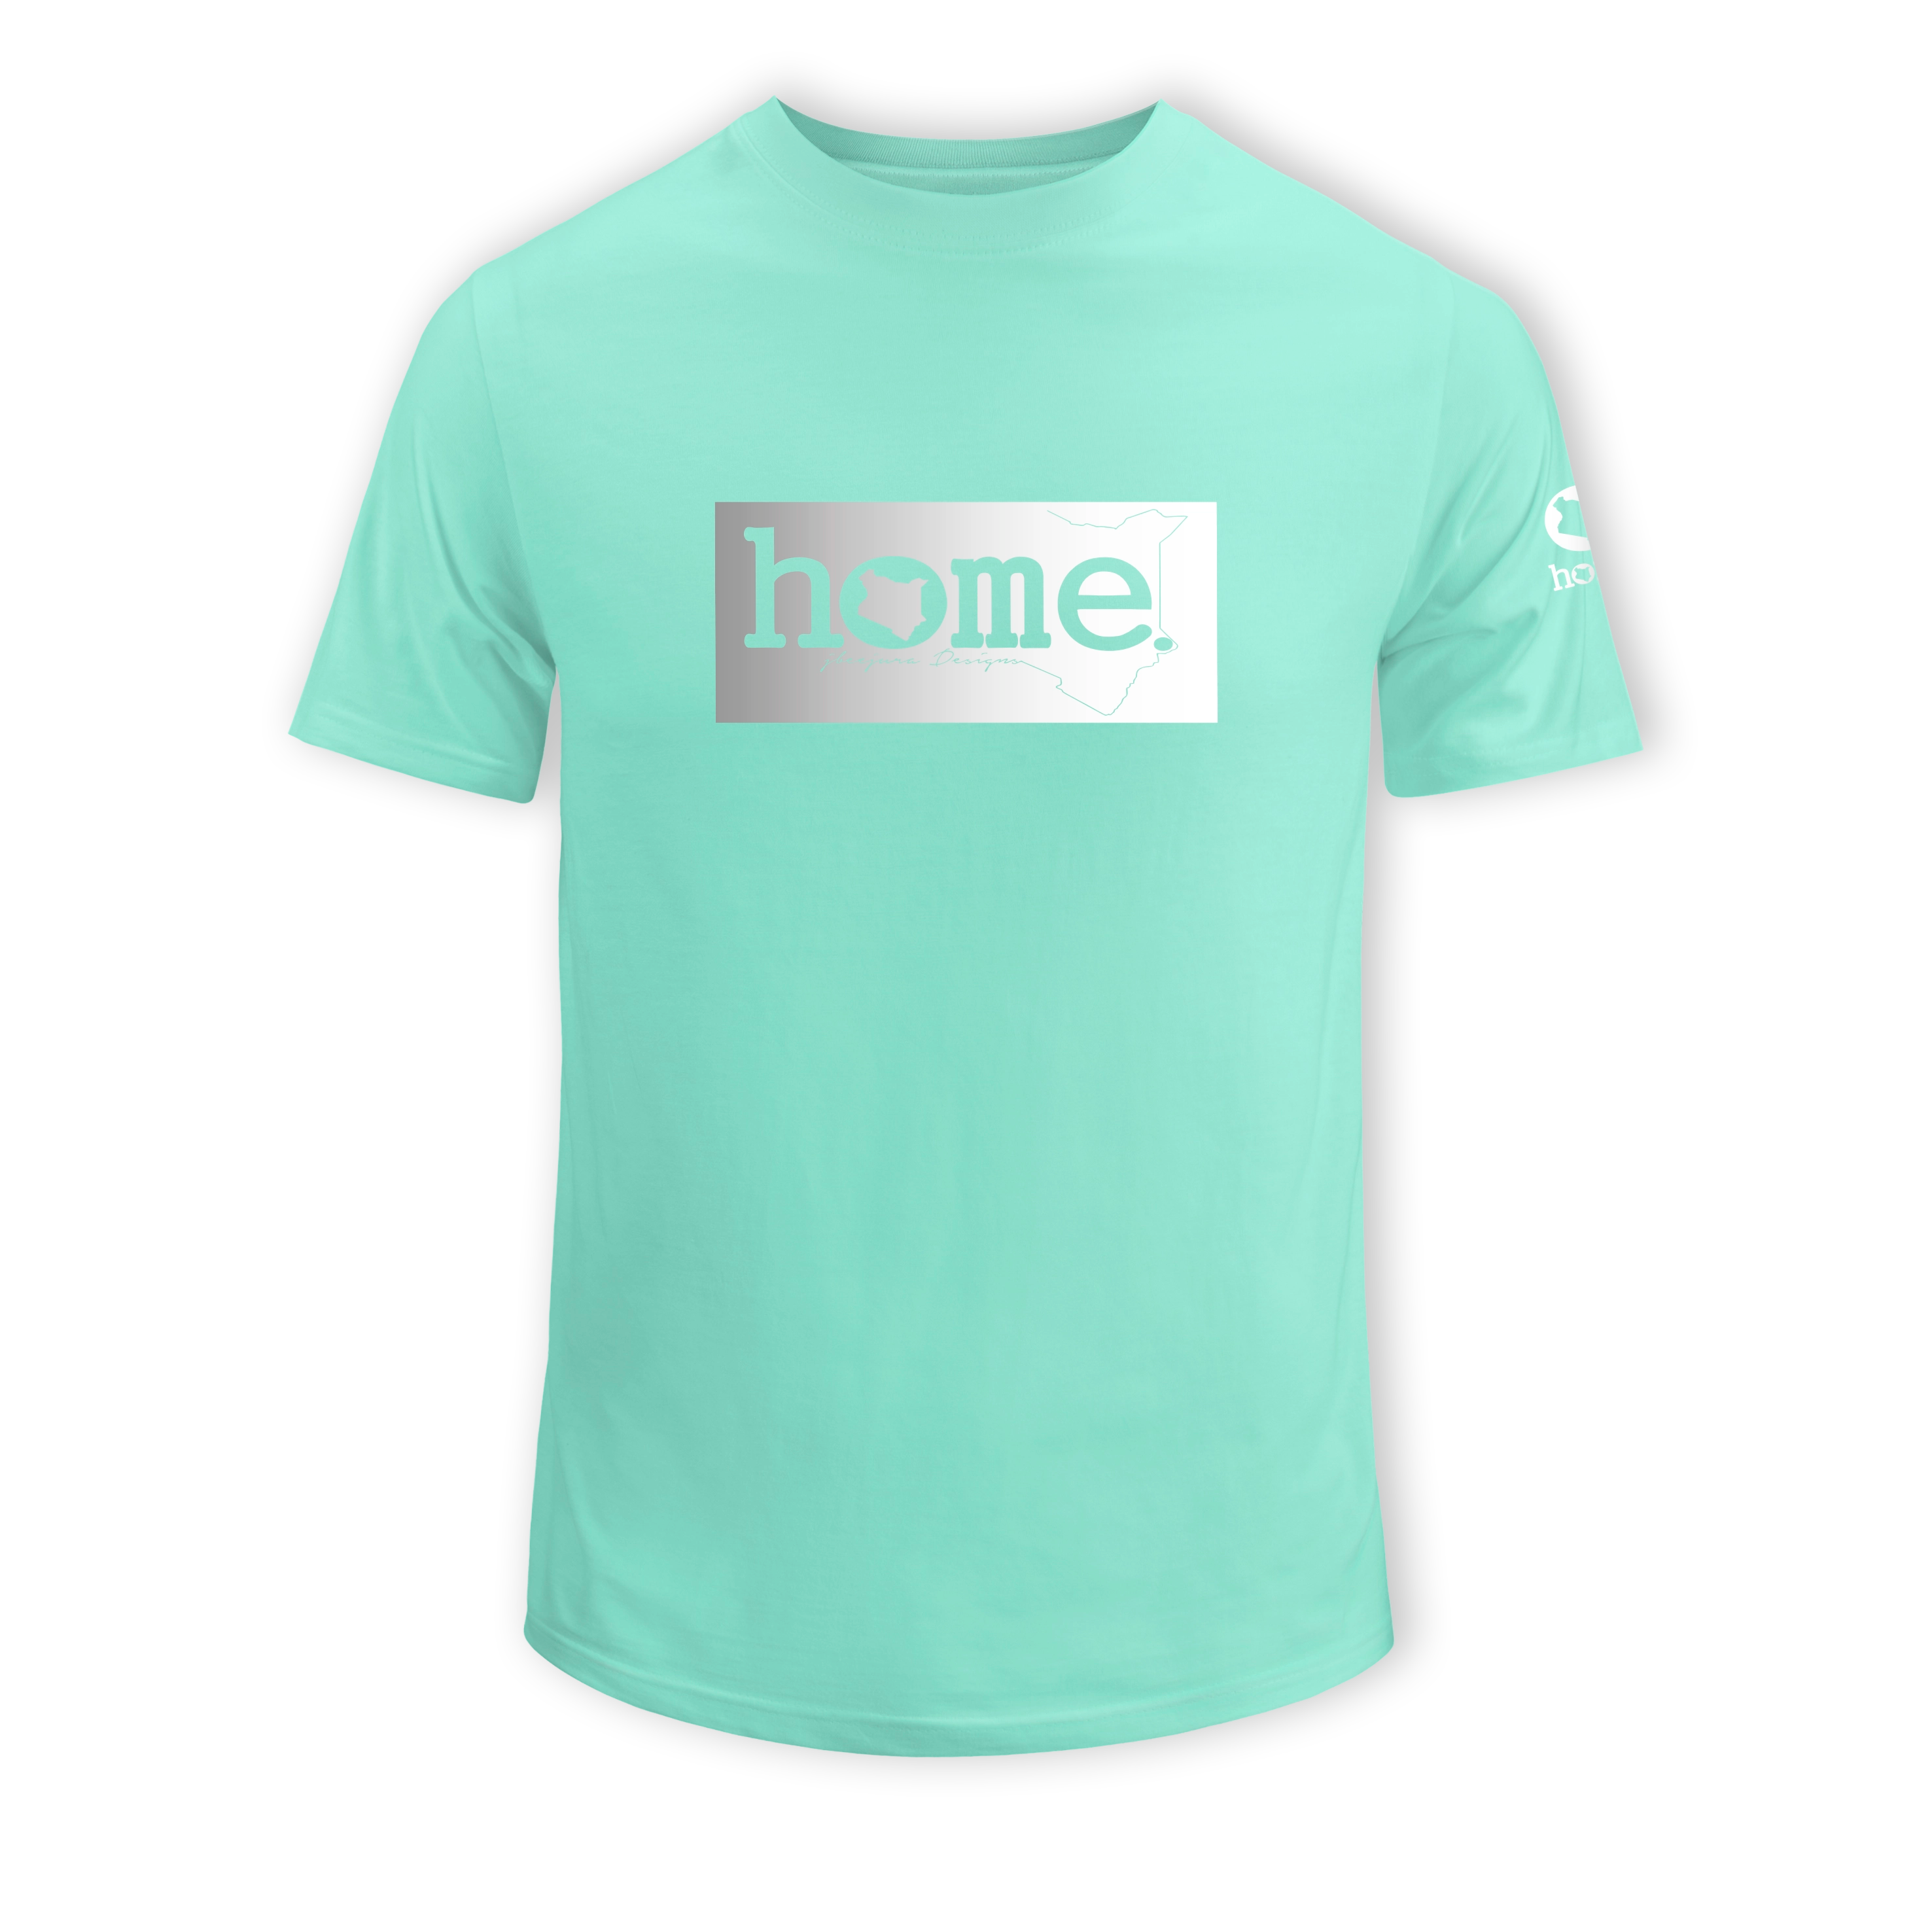 home_254 KIDS SHORT-SLEEVED TURQUOISE GREEN T-SHIRT WITH A SILVER CLASSIC PRINT – COTTON PLUS FABRIC